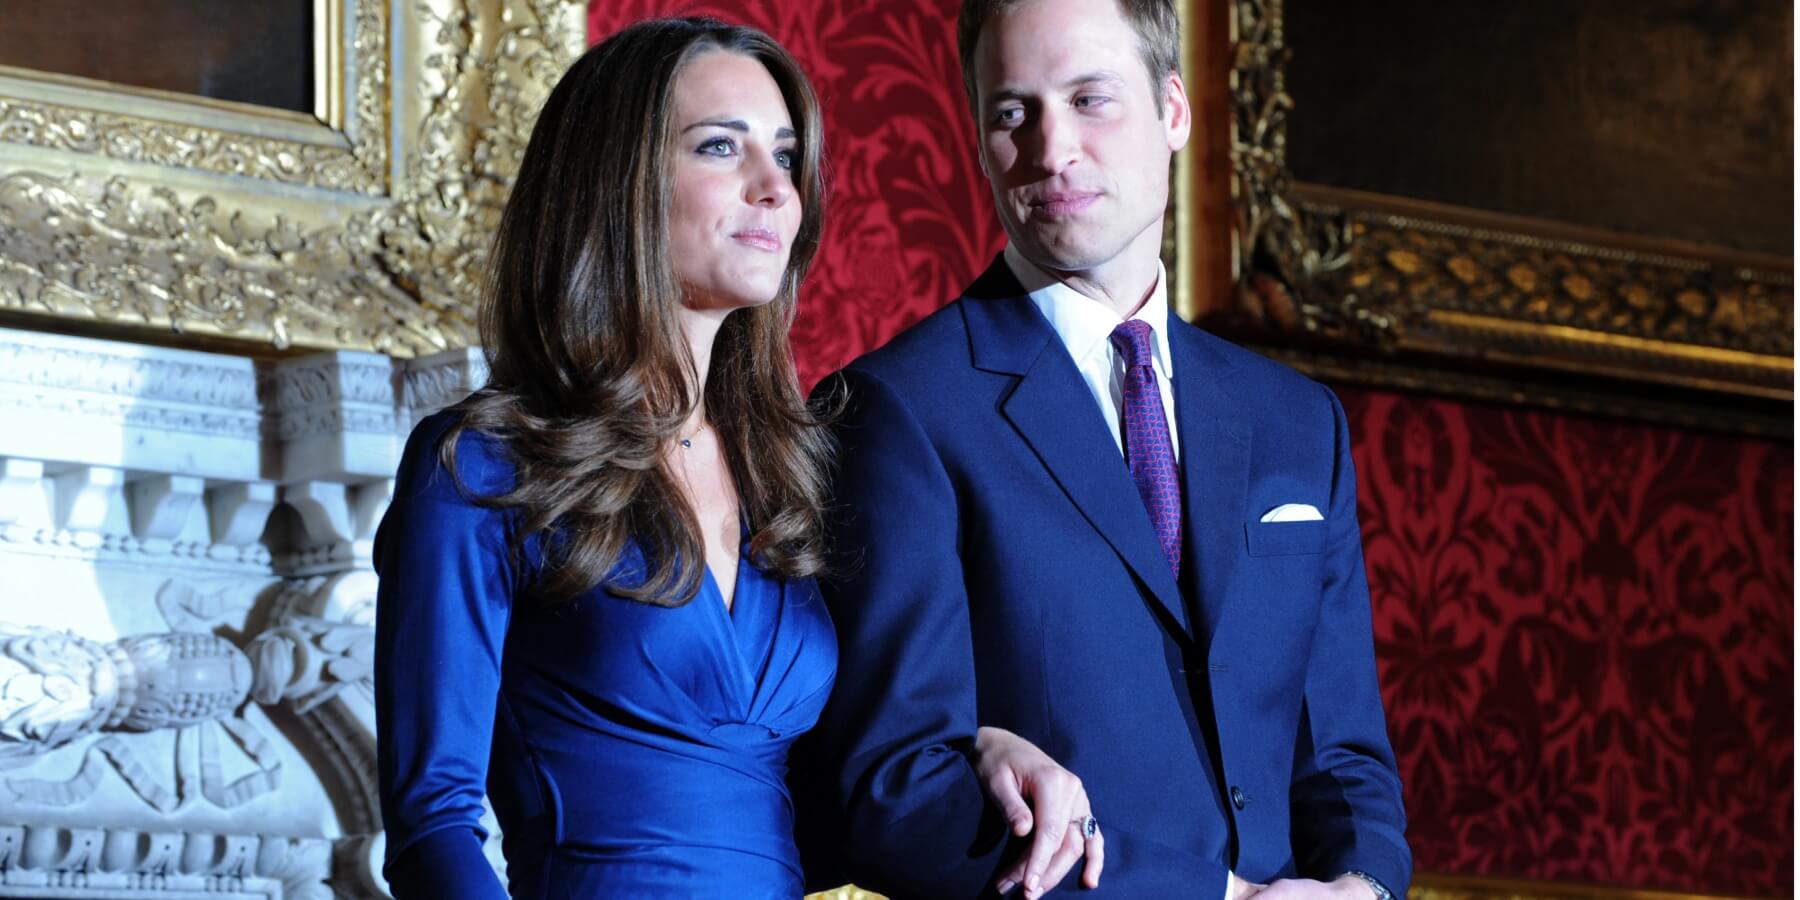 Kate Middleton and Prince William photographed at the time of their 2010 engagement.